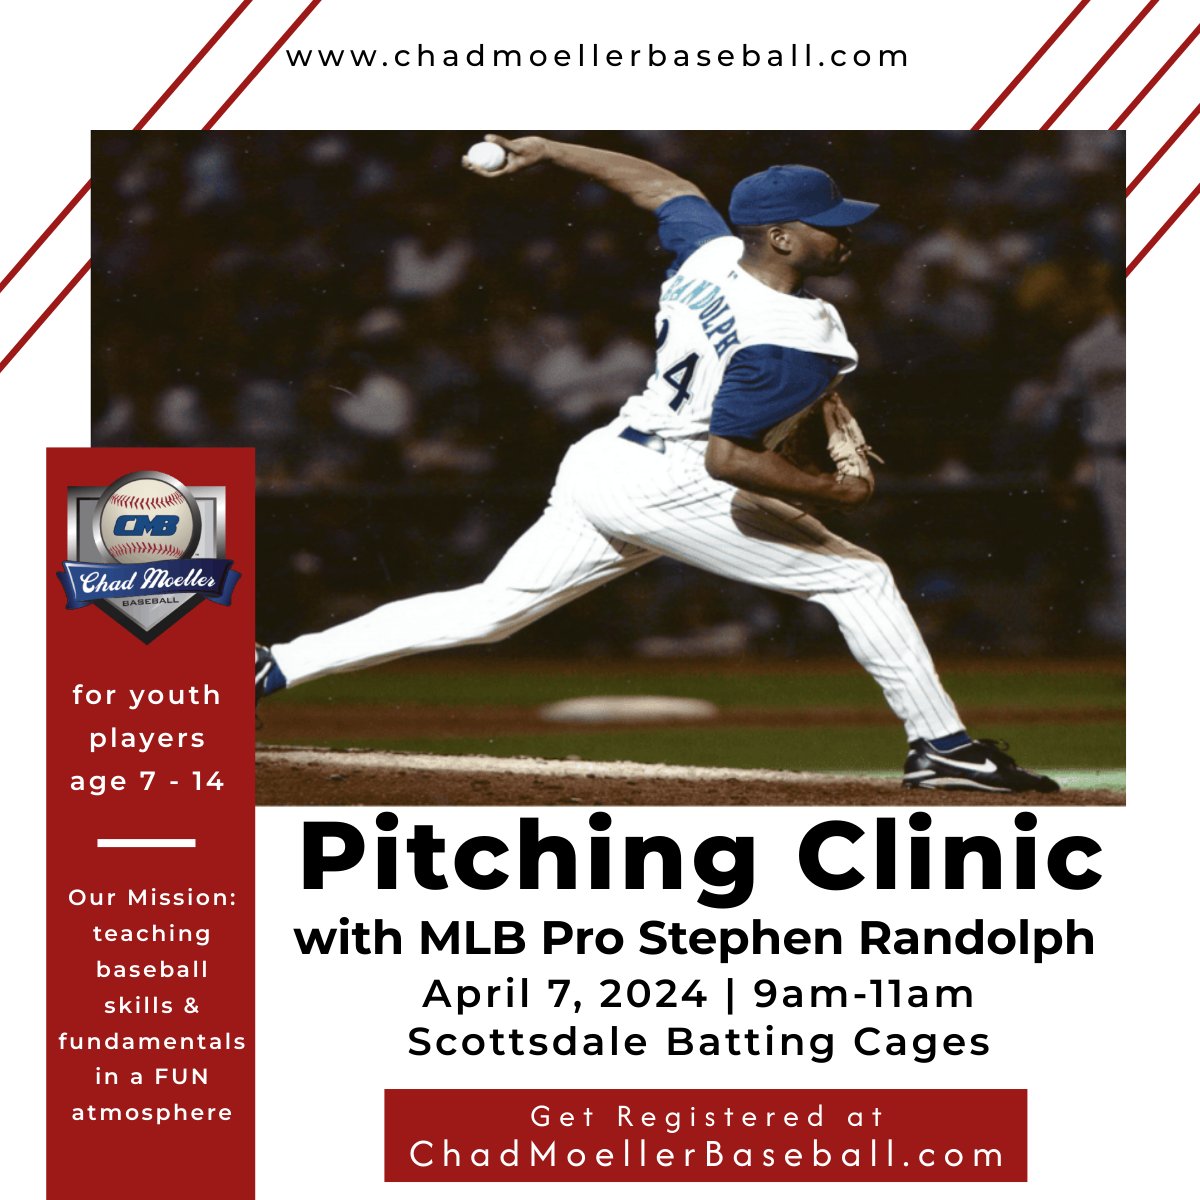 Pitcher Clinic this weekend, get more info and register at chadmoellerbaseball.com/clinics-and-ca…